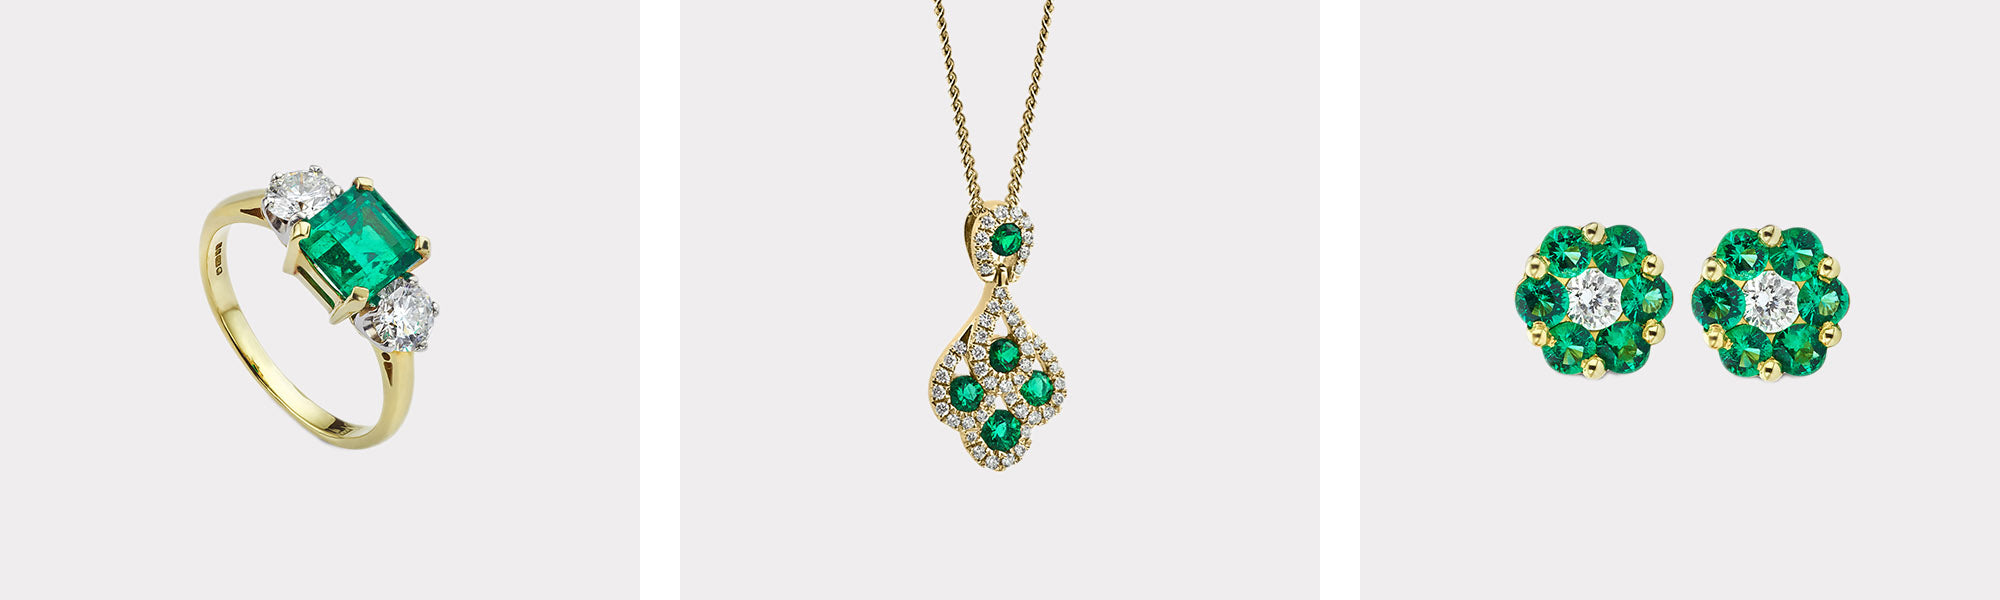 Emerald Jewellery at Deacons Jewelelrs